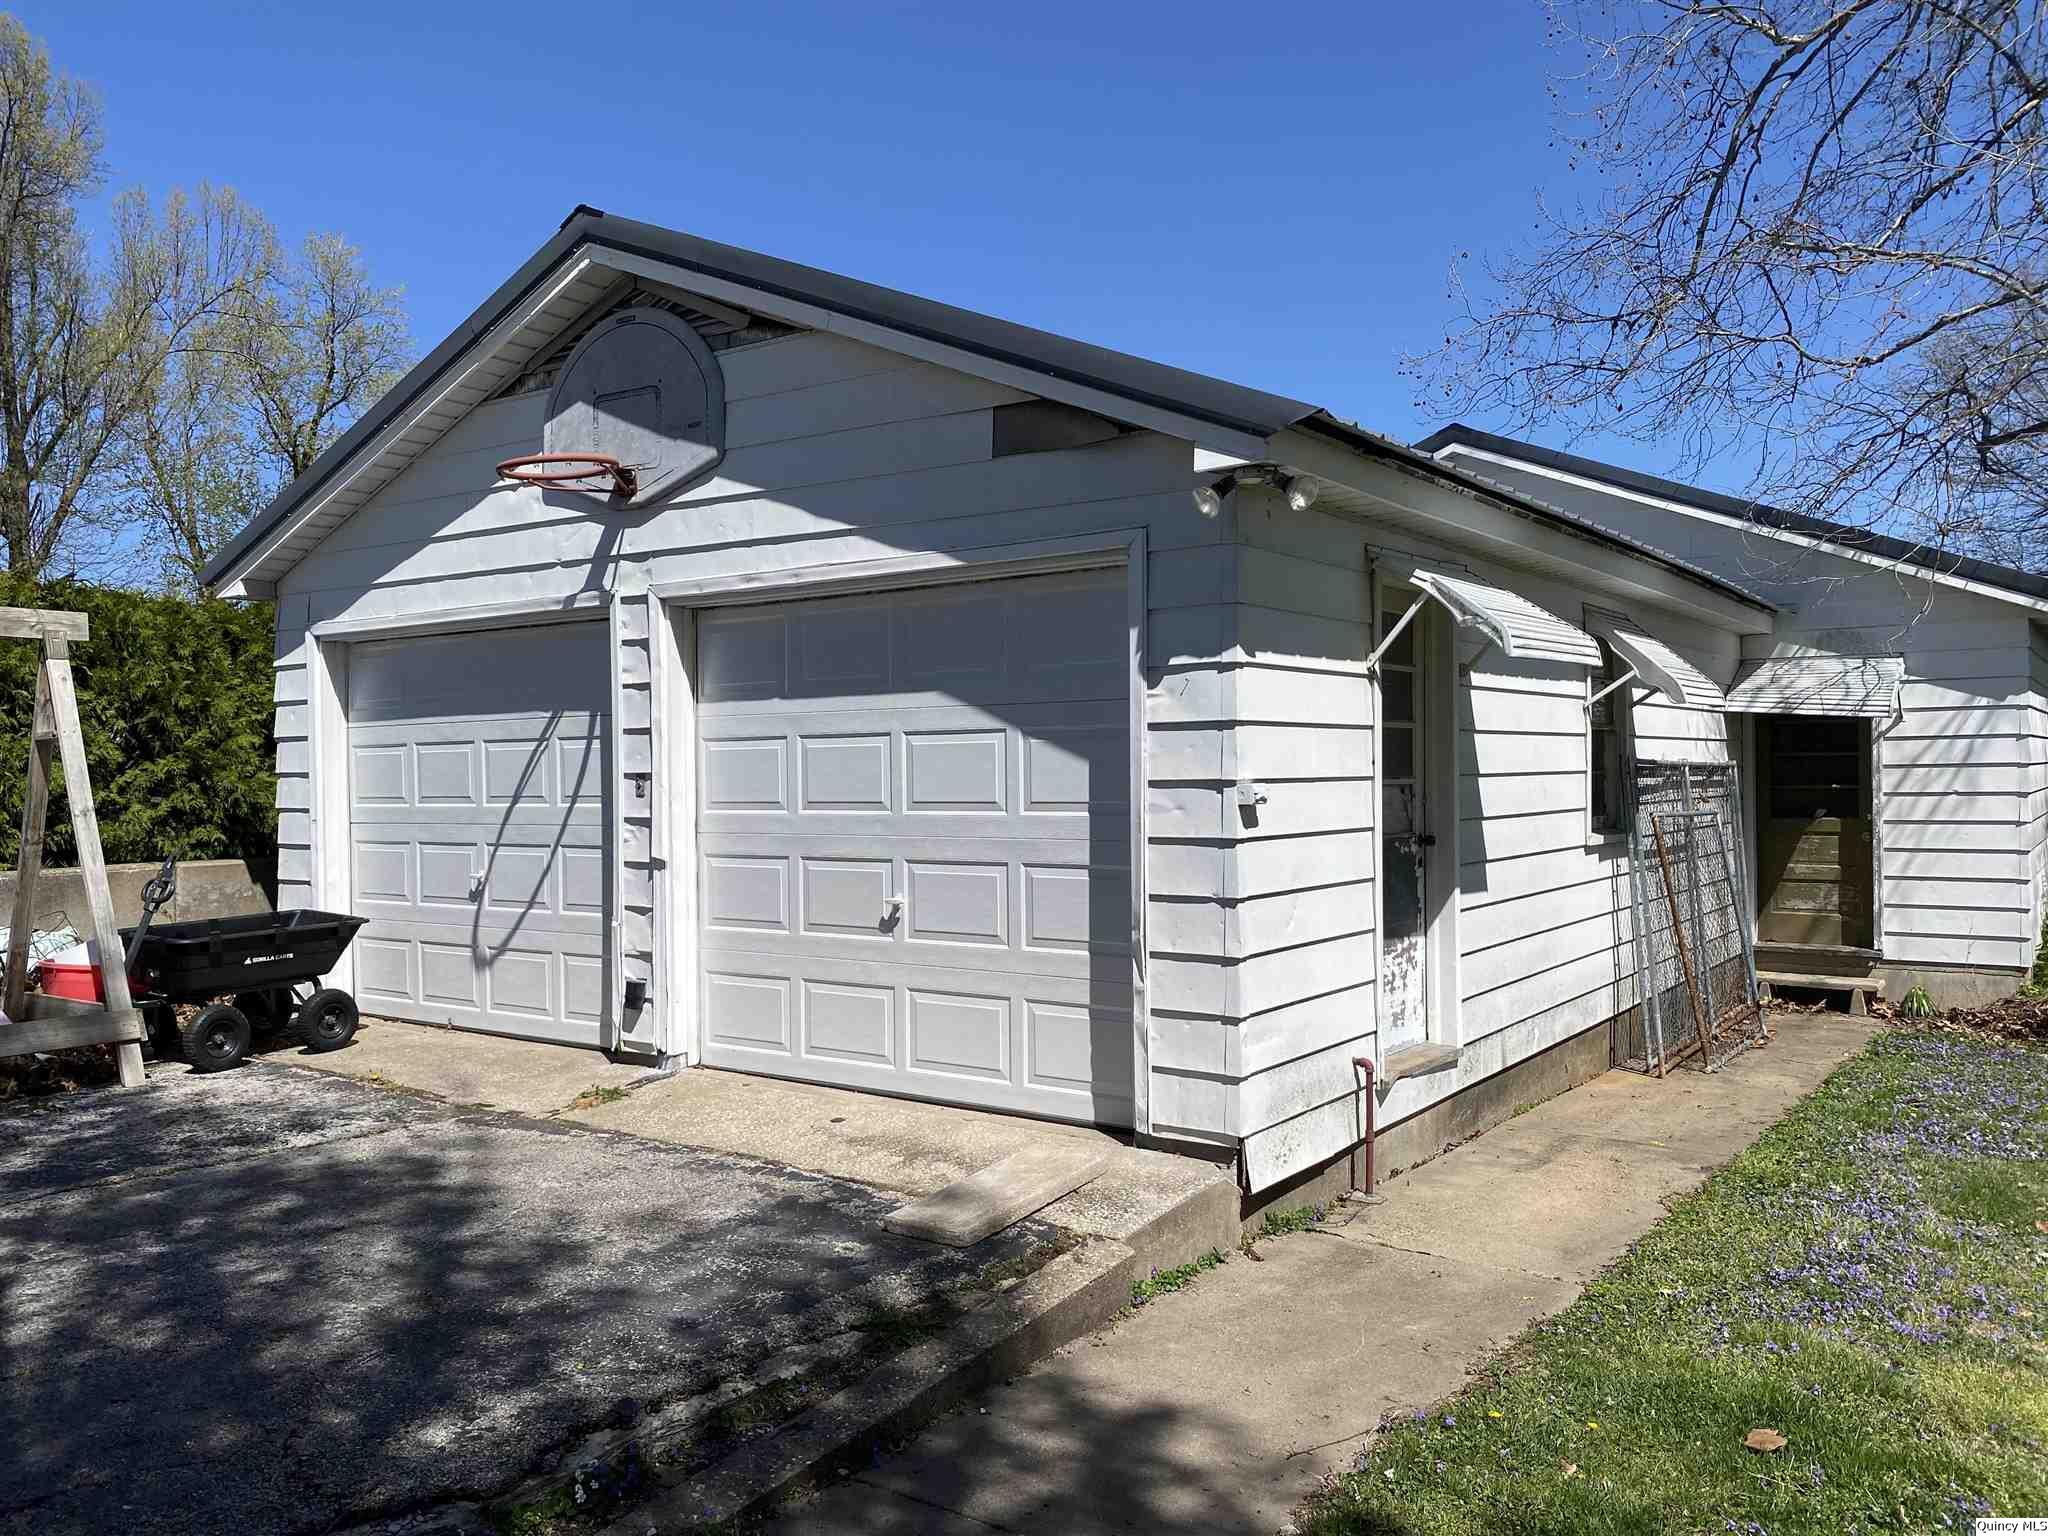 3921 S 24th, Quincy, Illinois 62305, 4 Bedrooms Bedrooms, ,2 BathroomsBathrooms,Residential,For Sale,3921 S 24th,203351